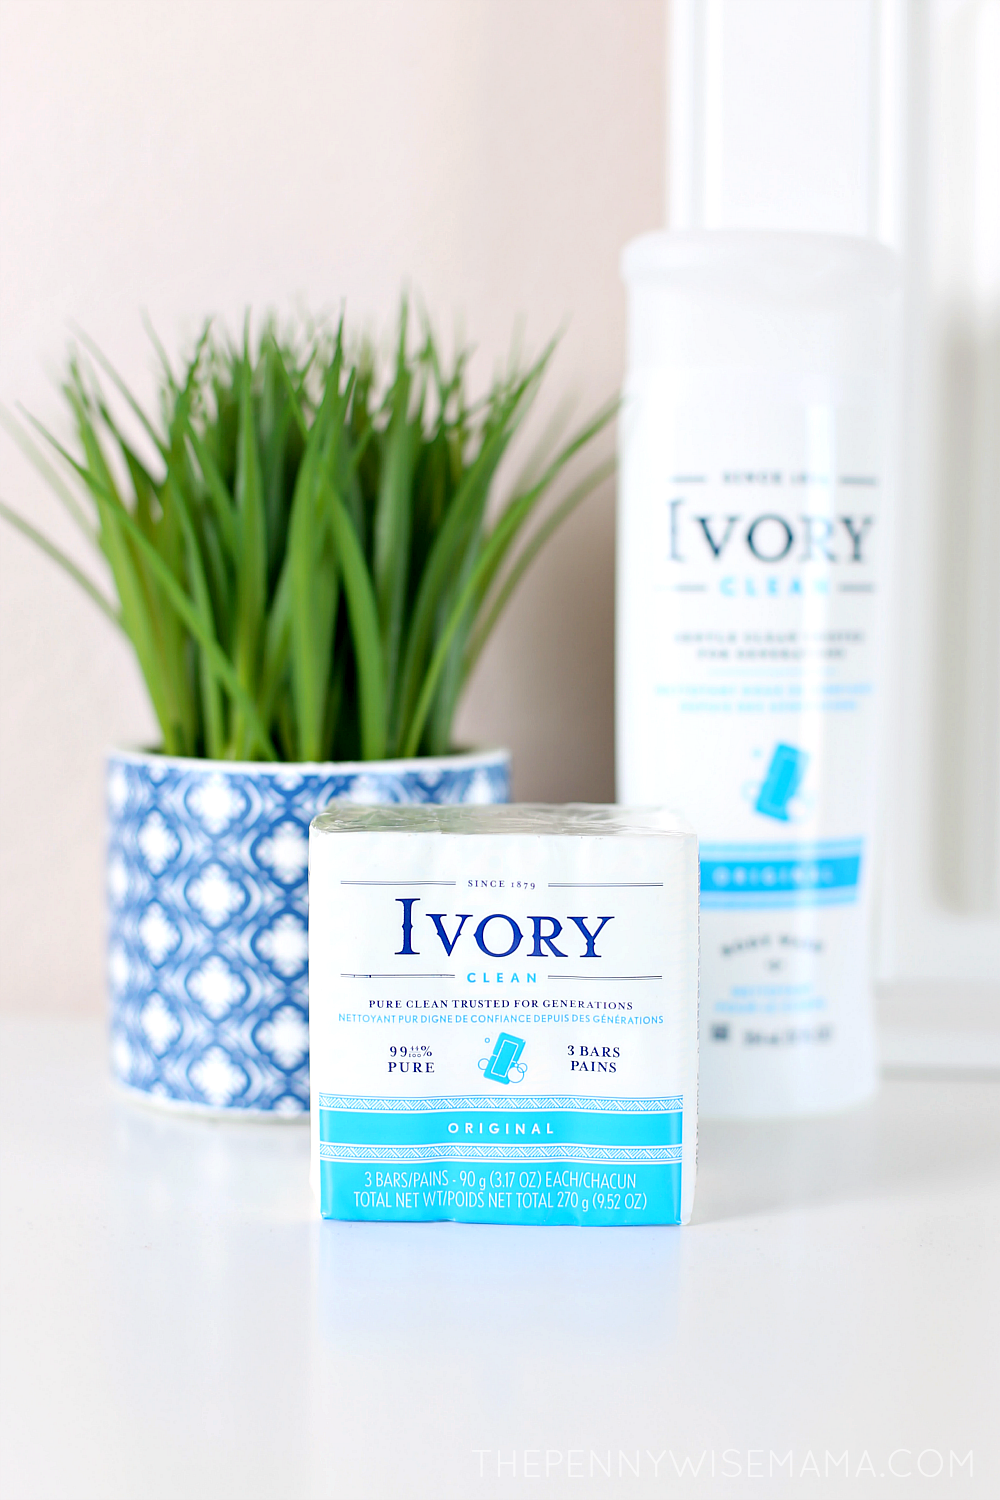 New Ivory Products - Original Bar Soap & Classic Body Wash